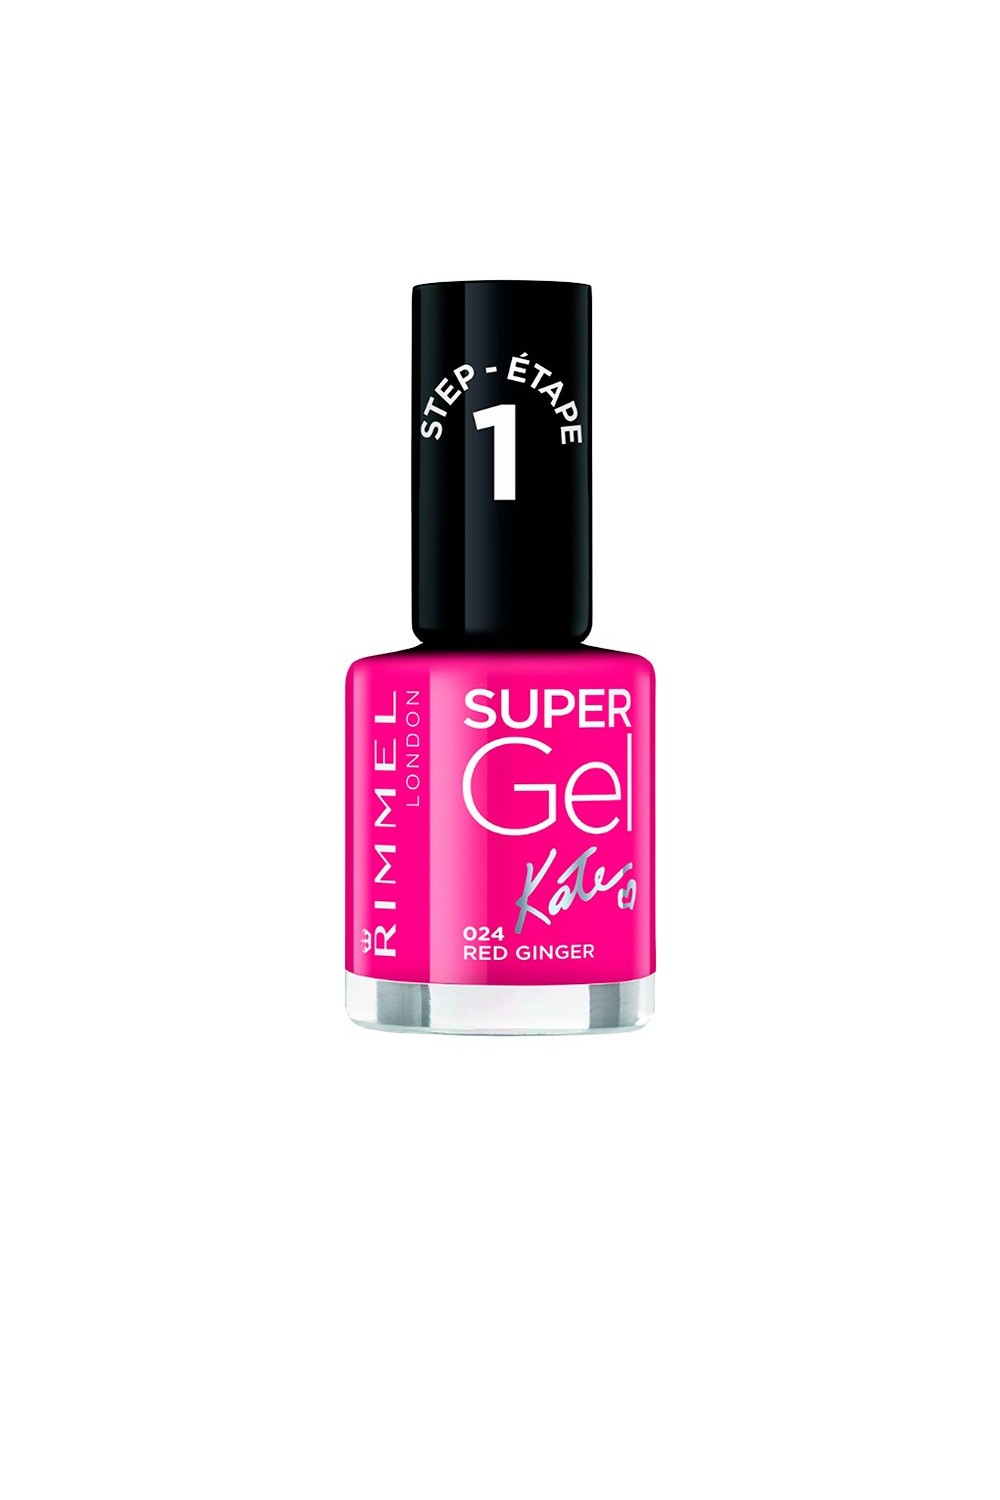 Rimmel London Supergel Kate Nail Lacquer 024 Red Ginger